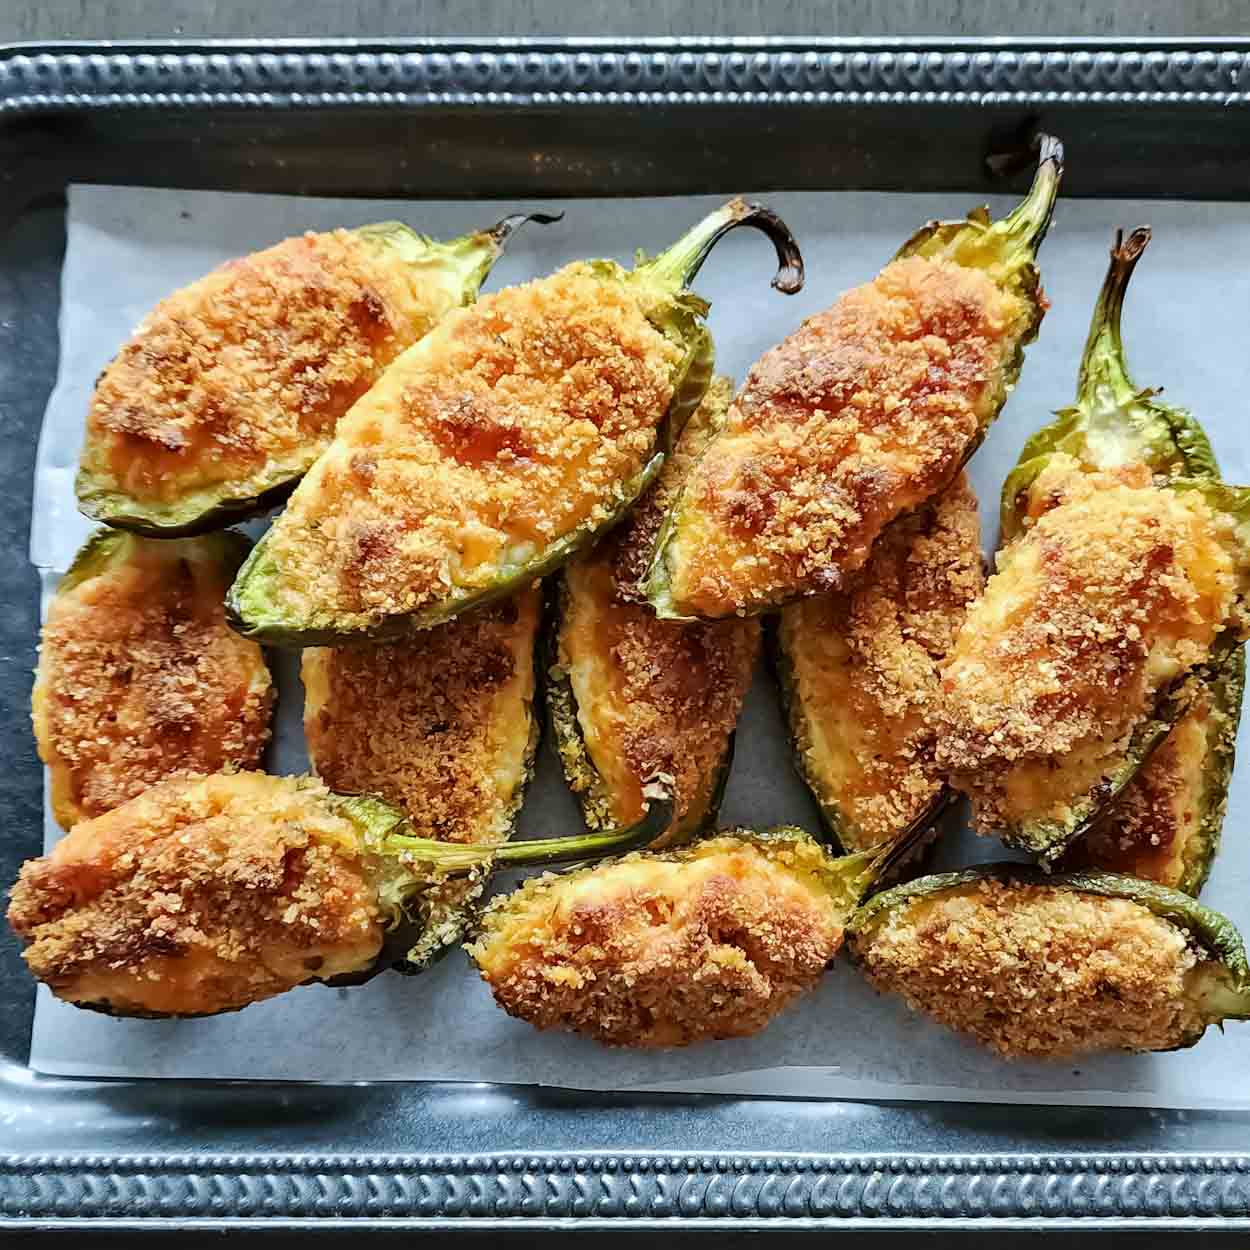 Jalapeno poppers with cream cheese baked to golden brown and served for an appetizer.